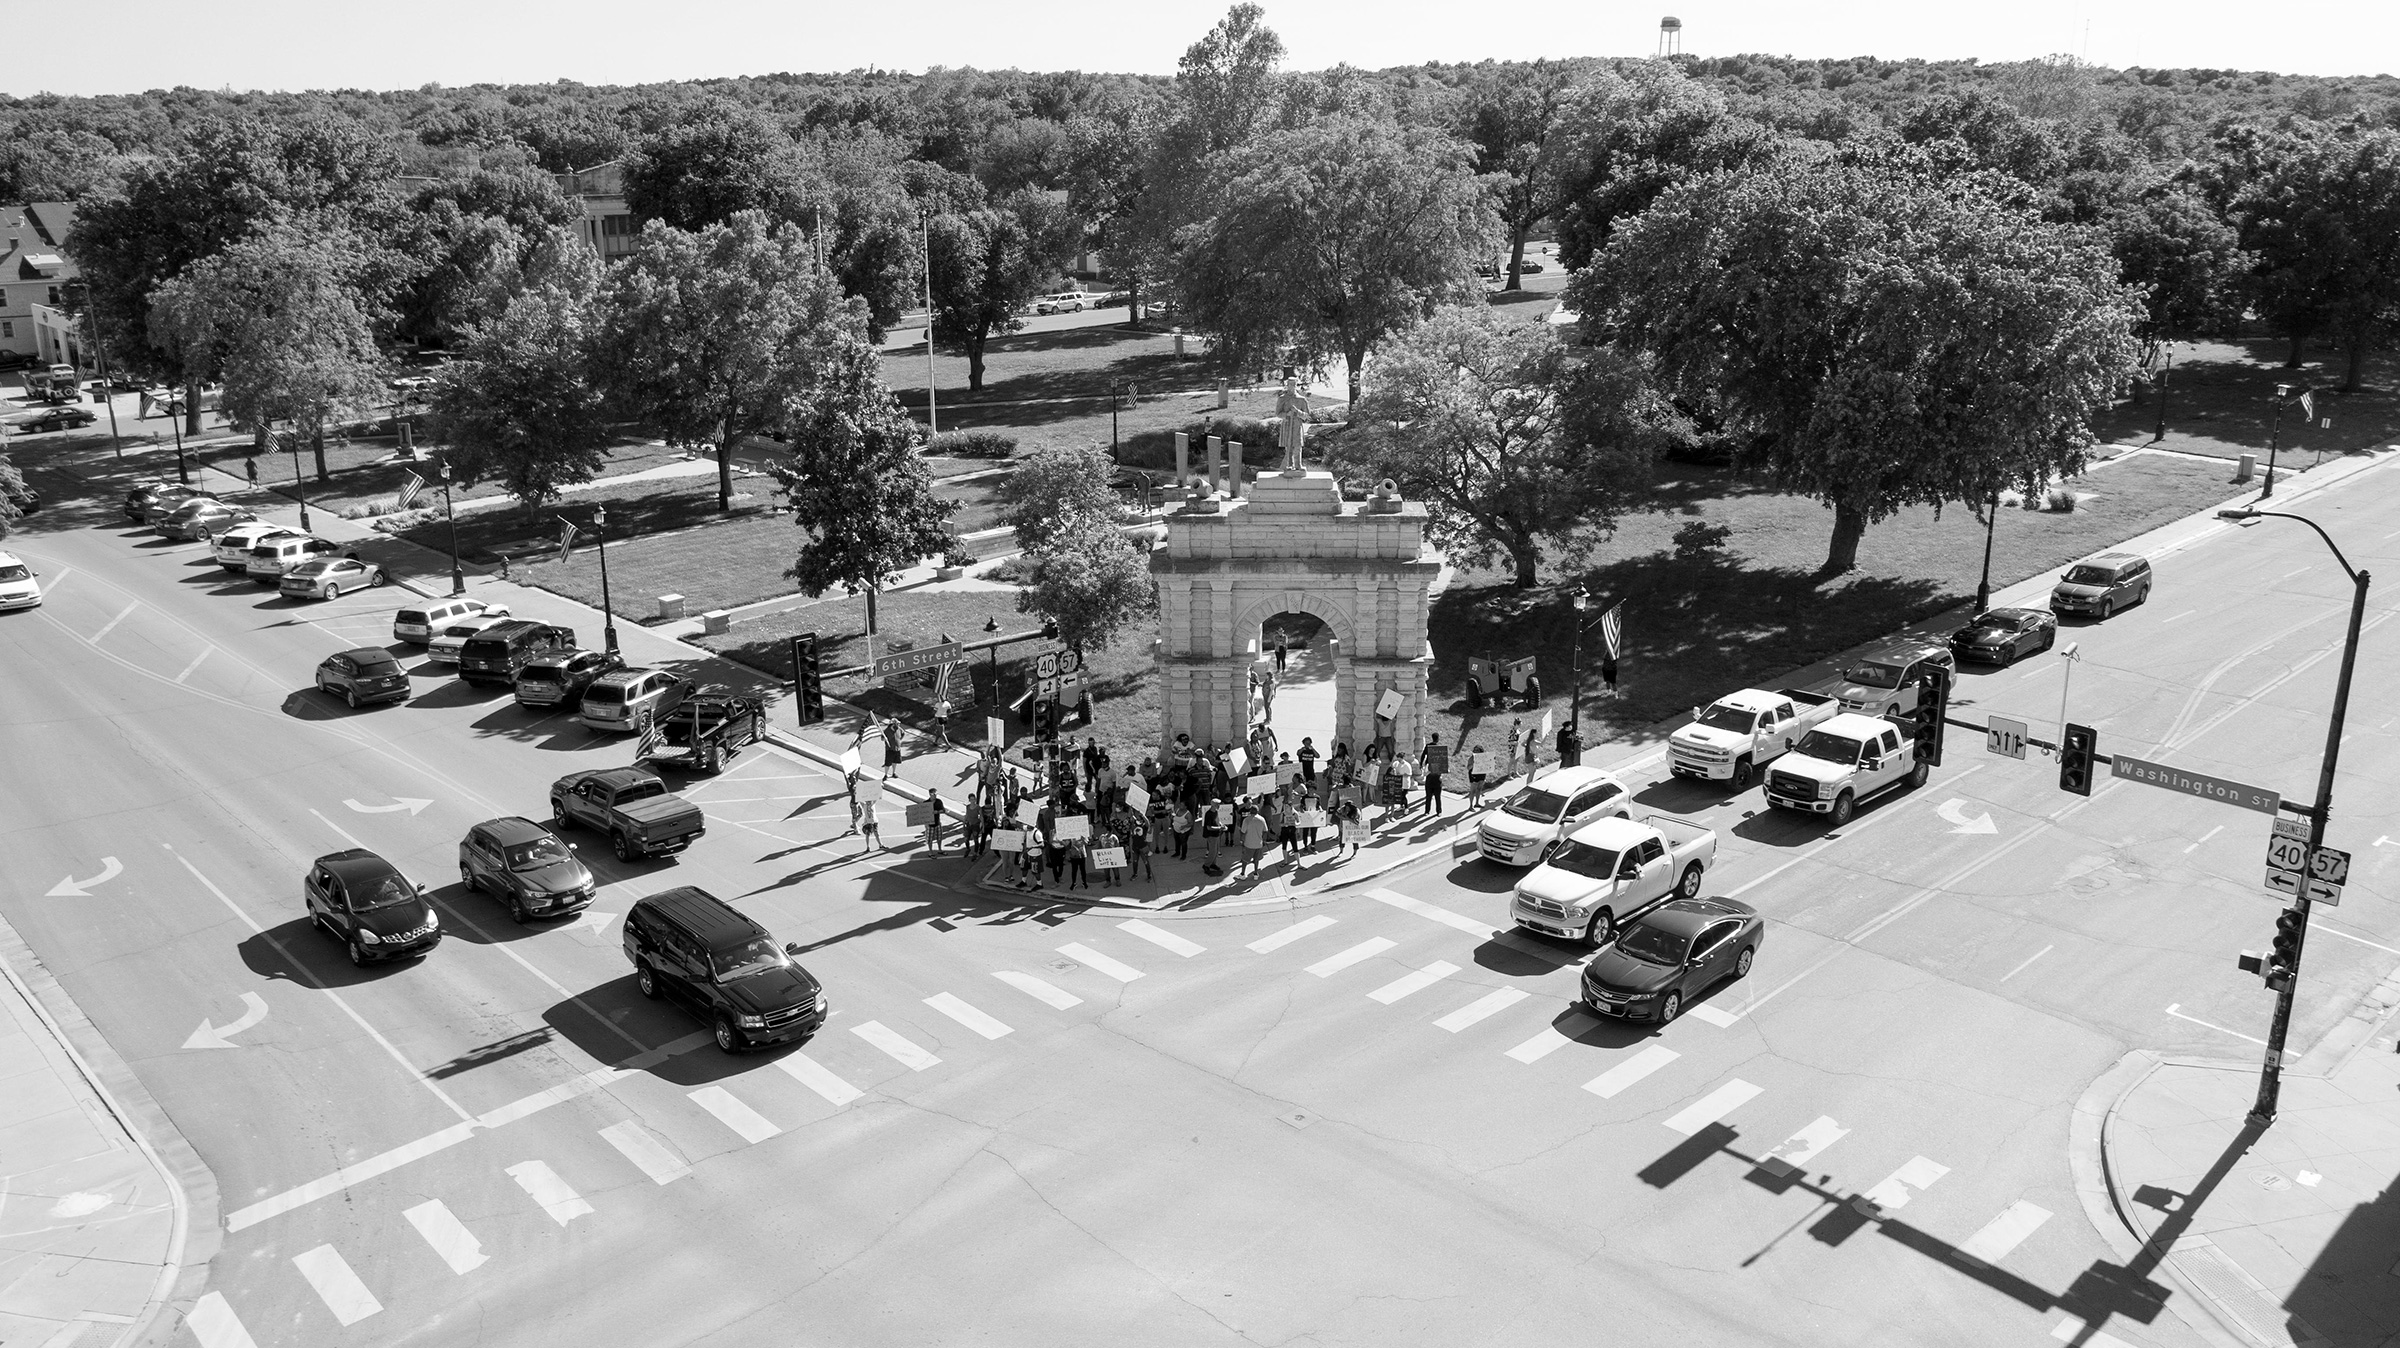 A Protest in response to the killing of George Floyd in Heritage Park, Junction City, Kans., May 29, 2020. (Doug Barrett)